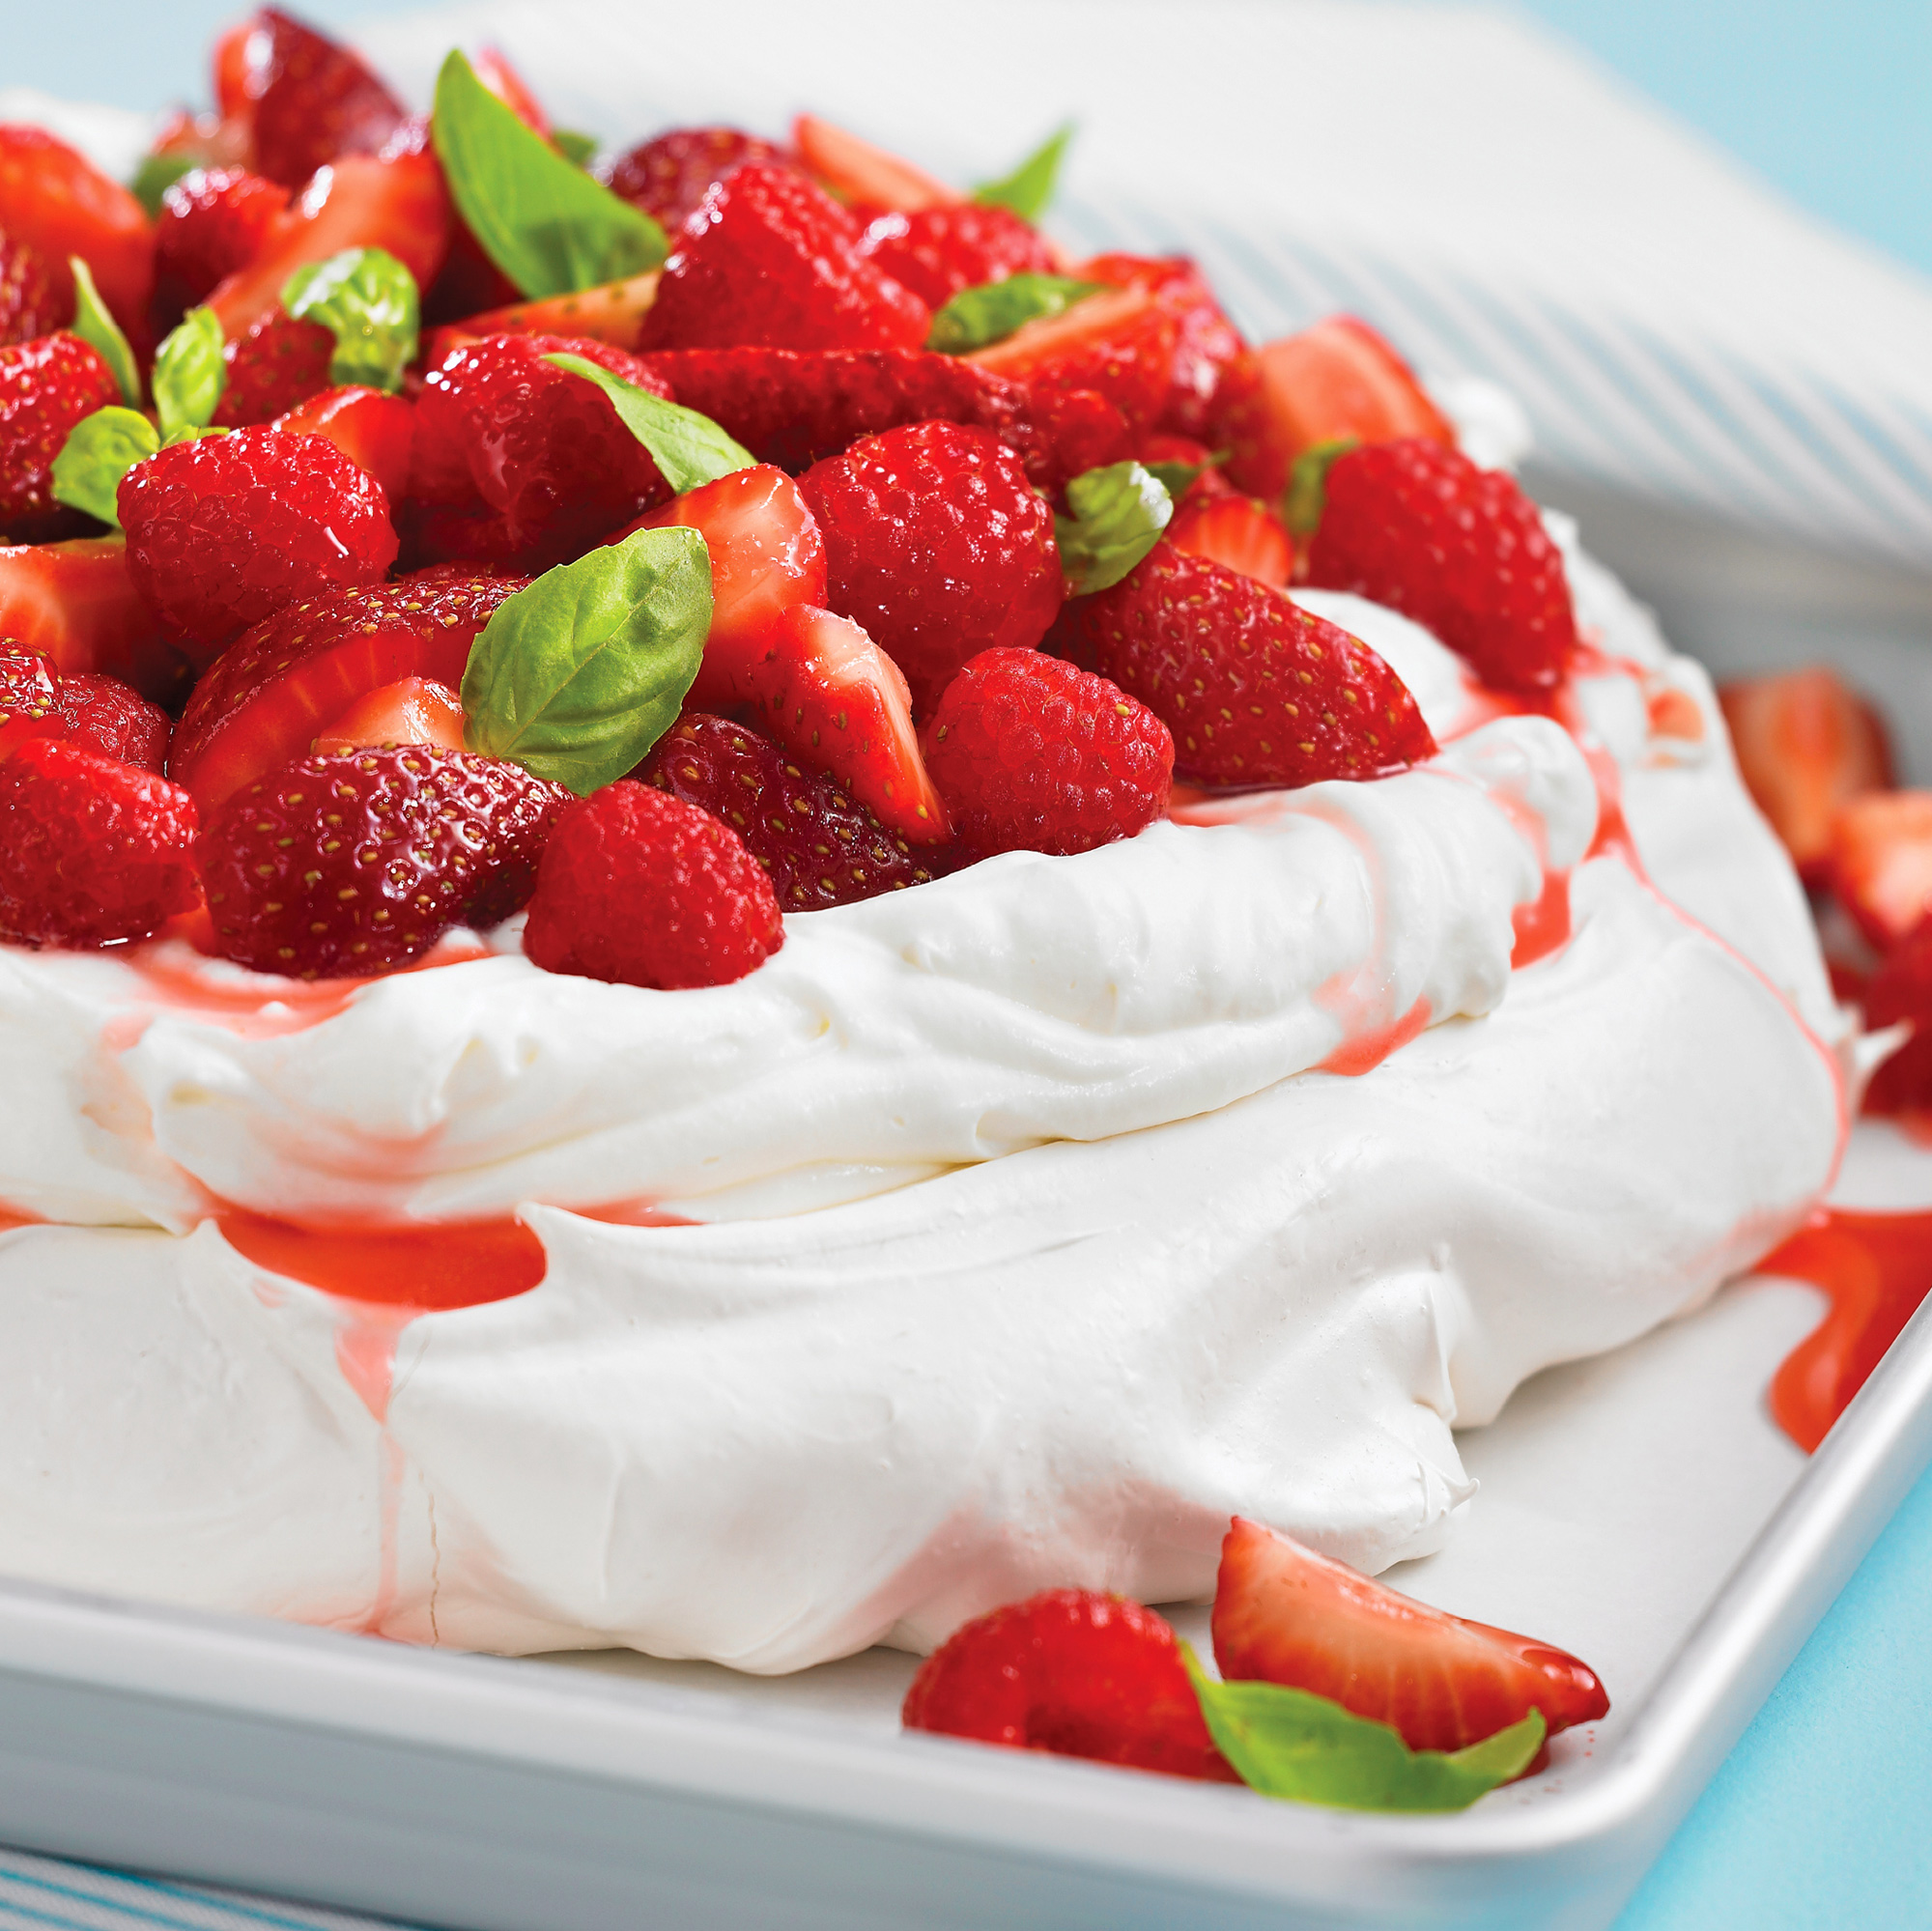 Light and airy Pavlova is topped with berries and tangy whipped cream.